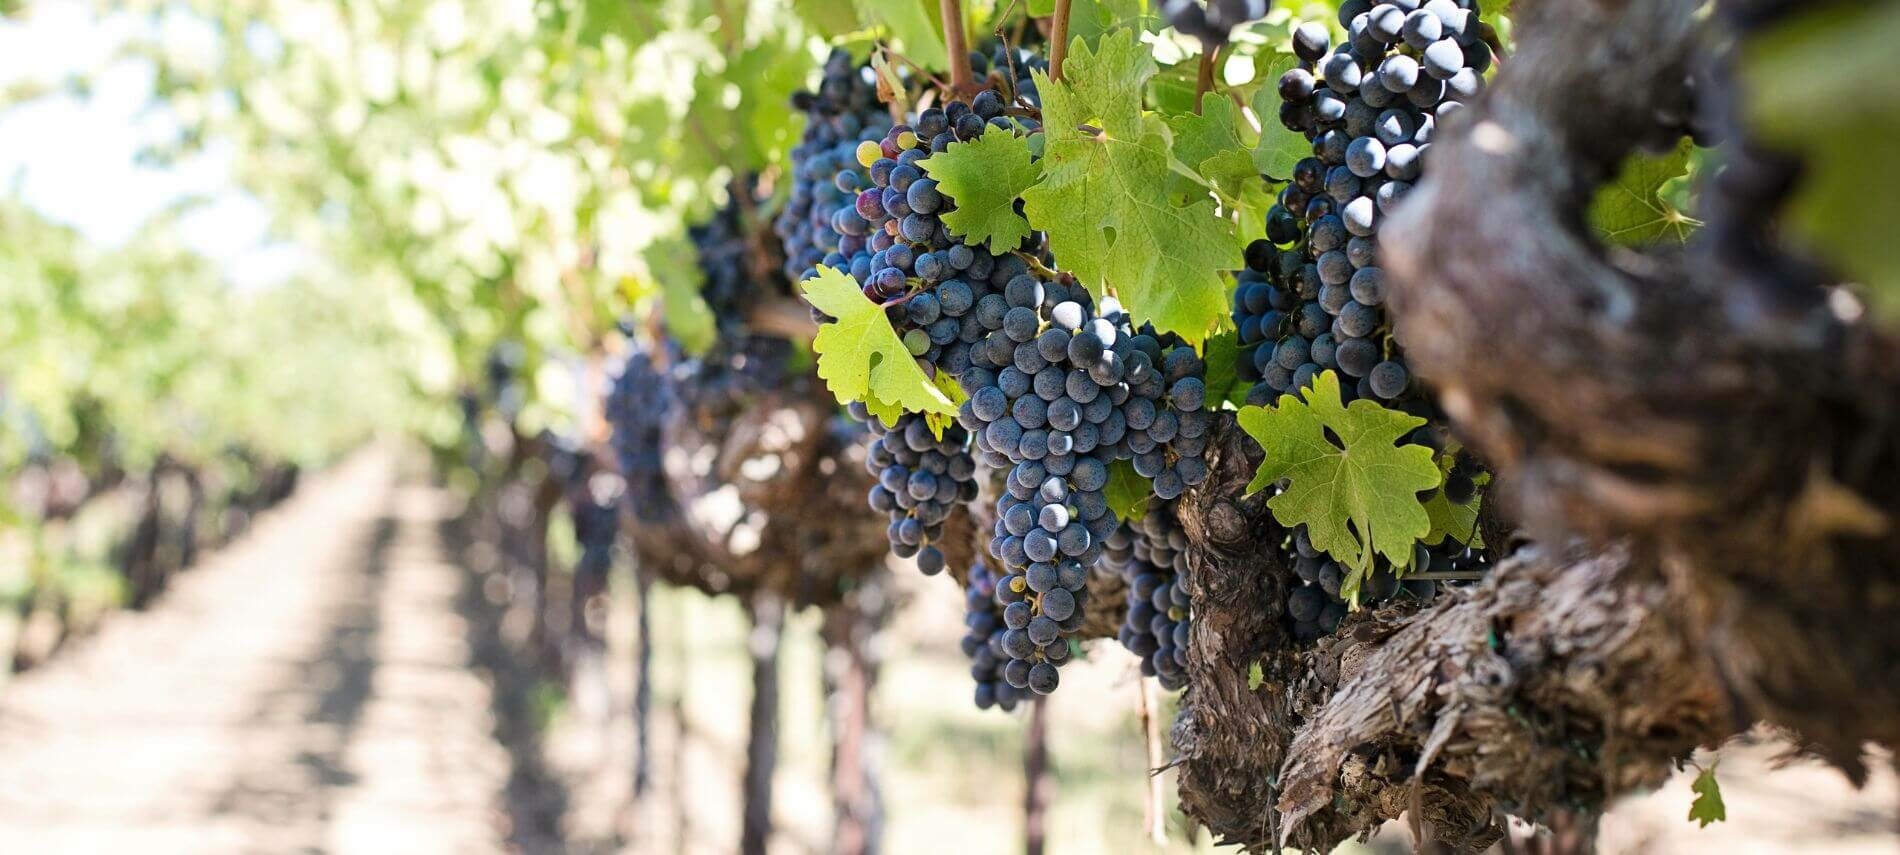 Vineyard with ripe bunches of Concord grapes.